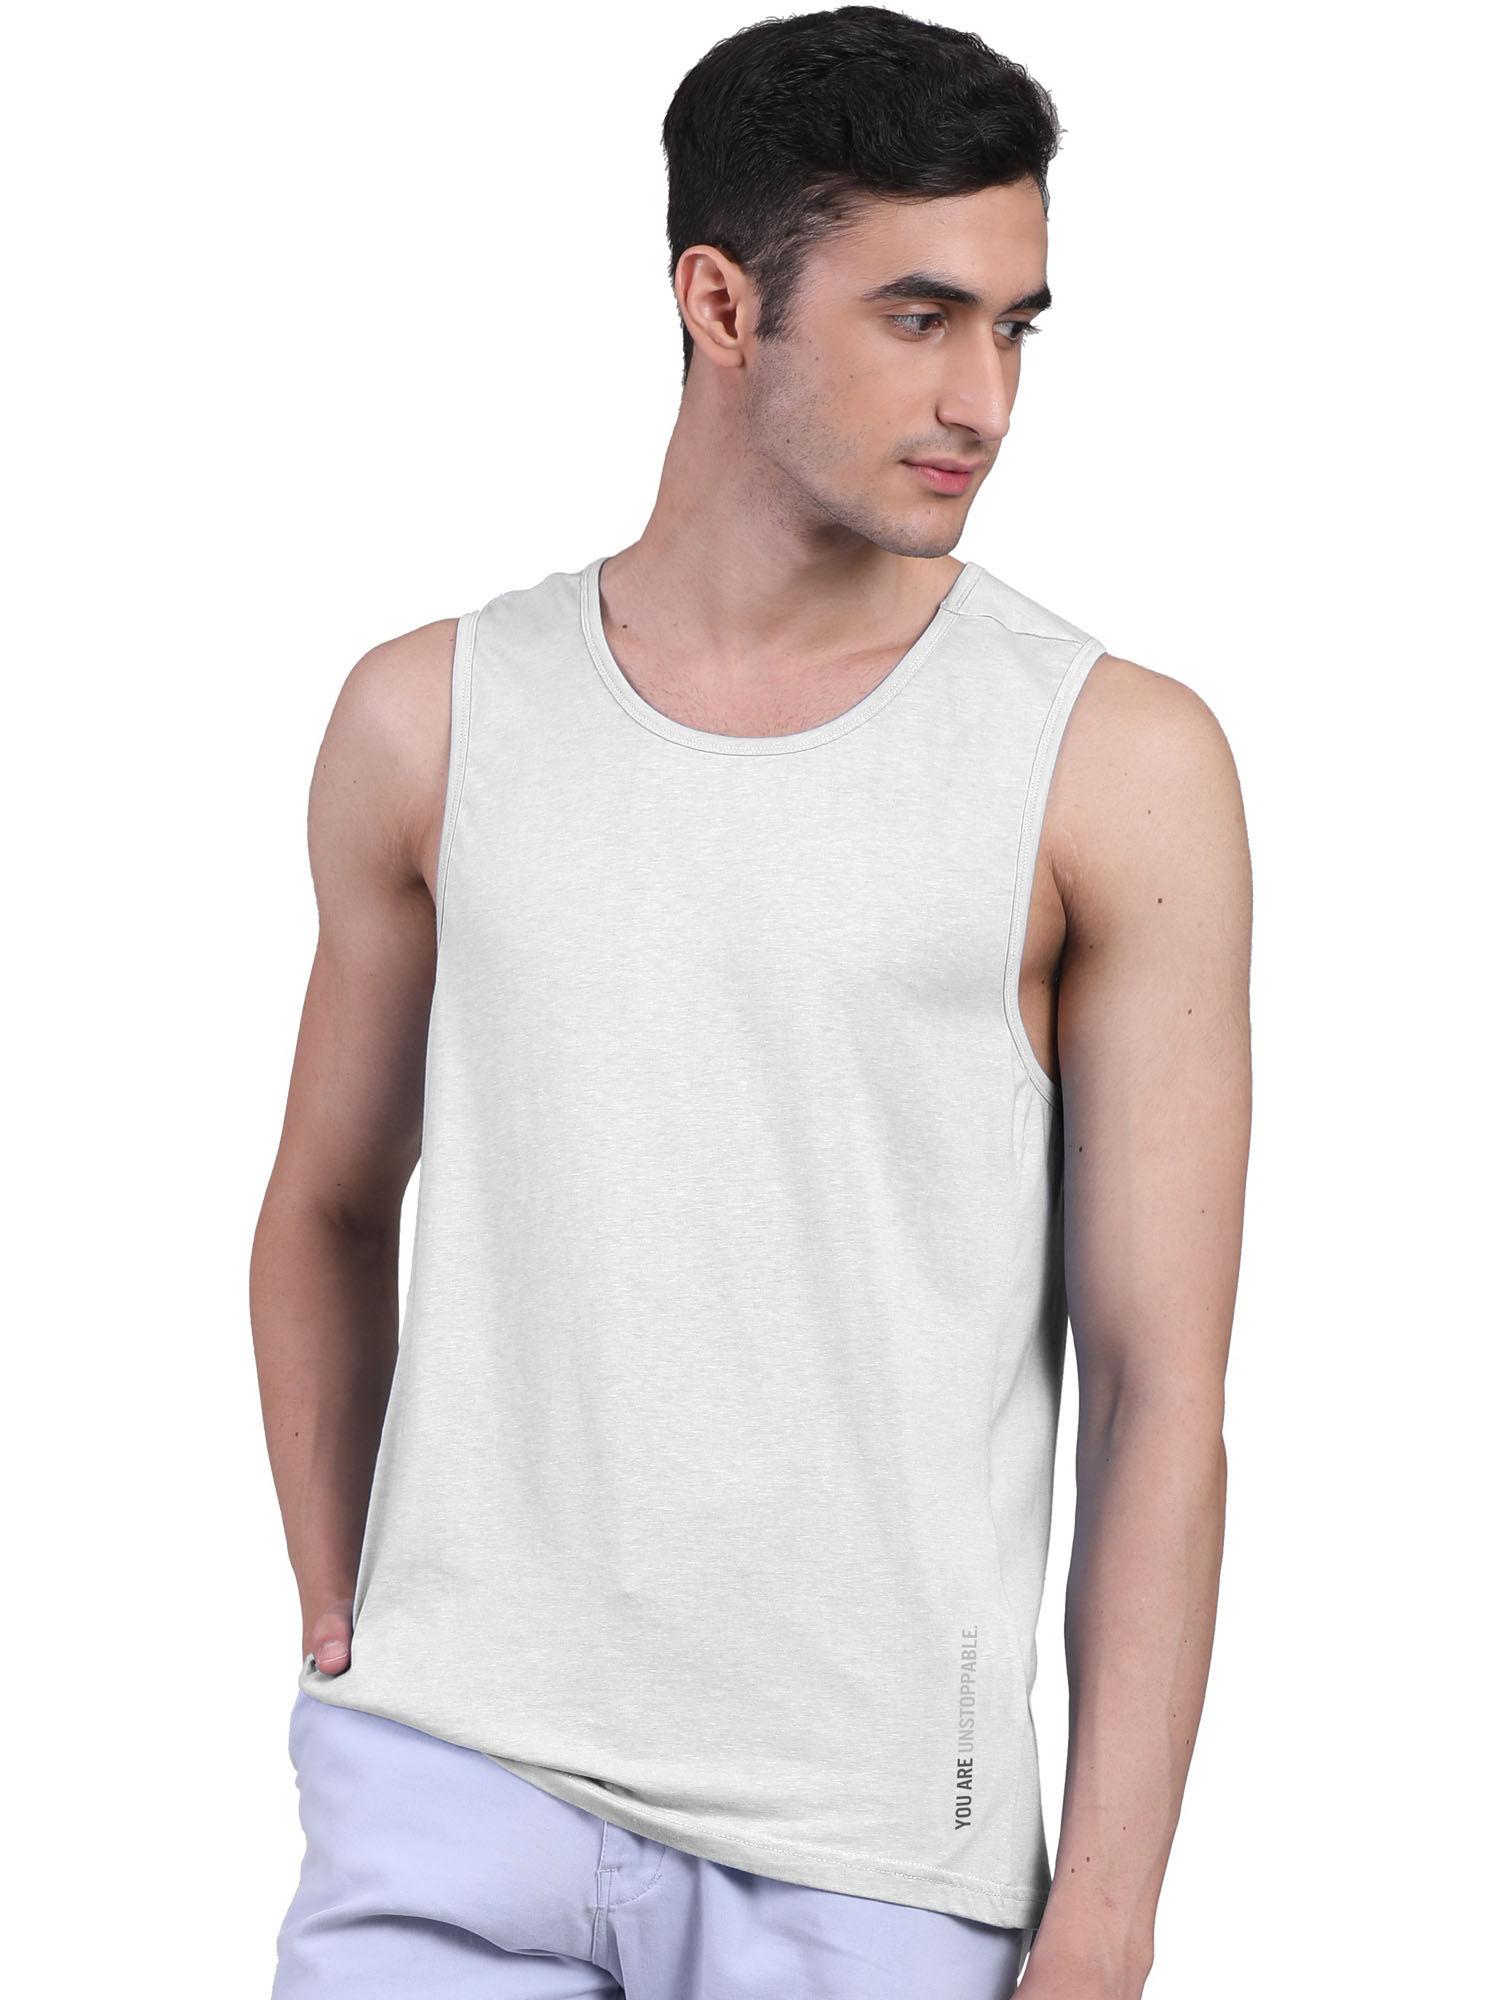 mens-twin-skin-bamboo-cotton-anti-microbial-active-vest-white